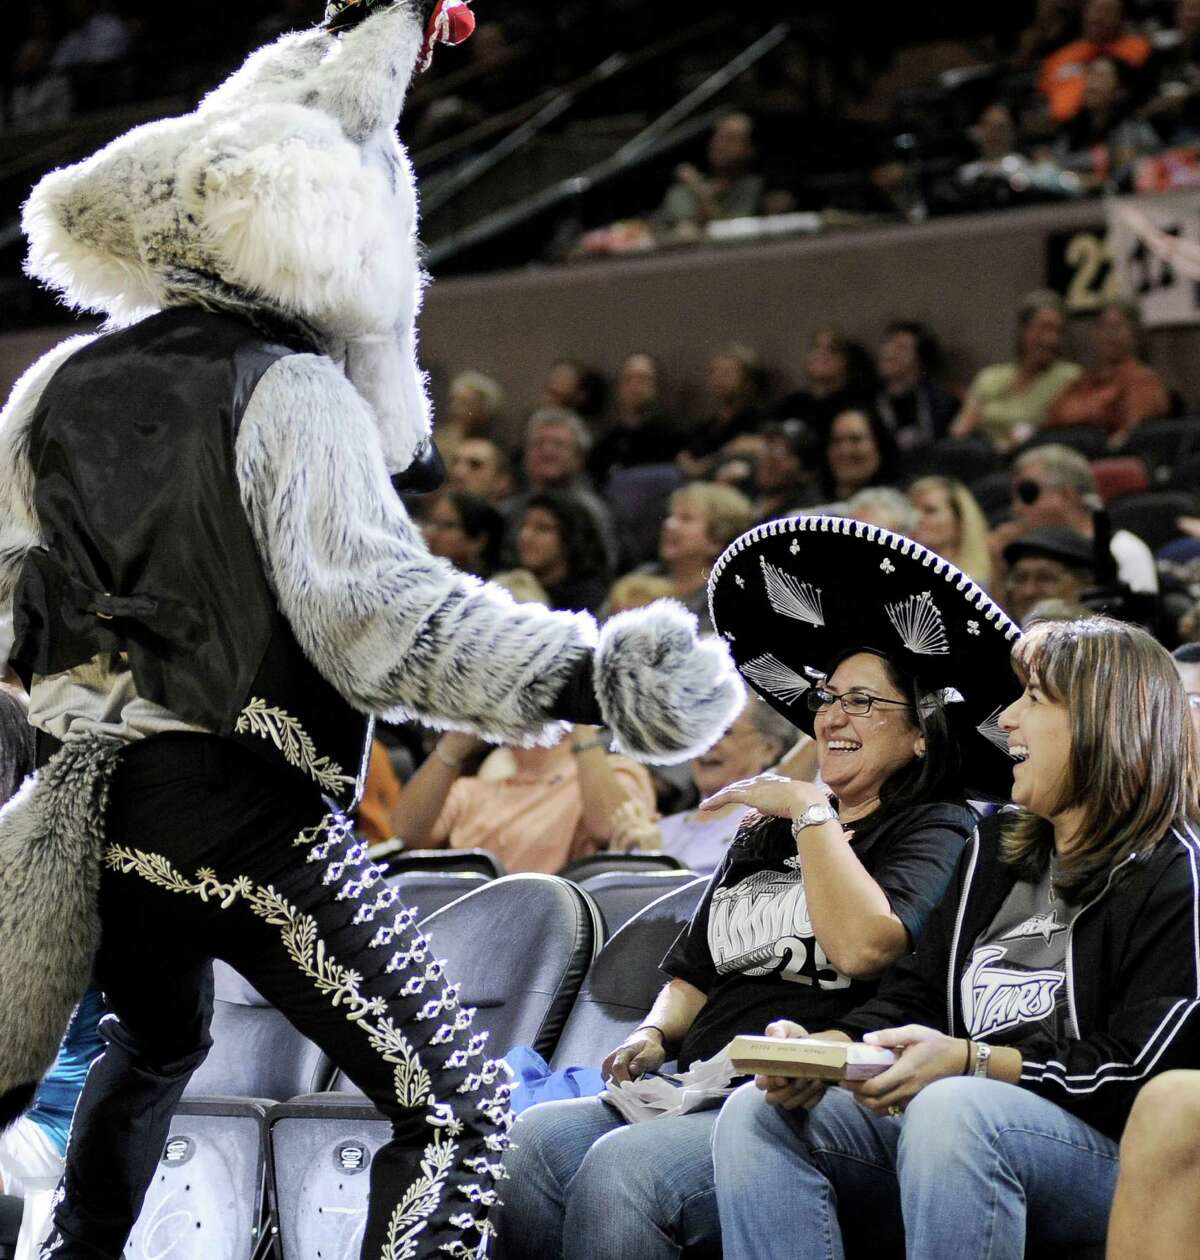 San Antonio Silver Stars mascot The Fox plays with fans during the first half of a WNBA basketball game against the Seattle Storm, Friday Sept. 14, 2012, in San Antonio. San Antonio won 90-66.